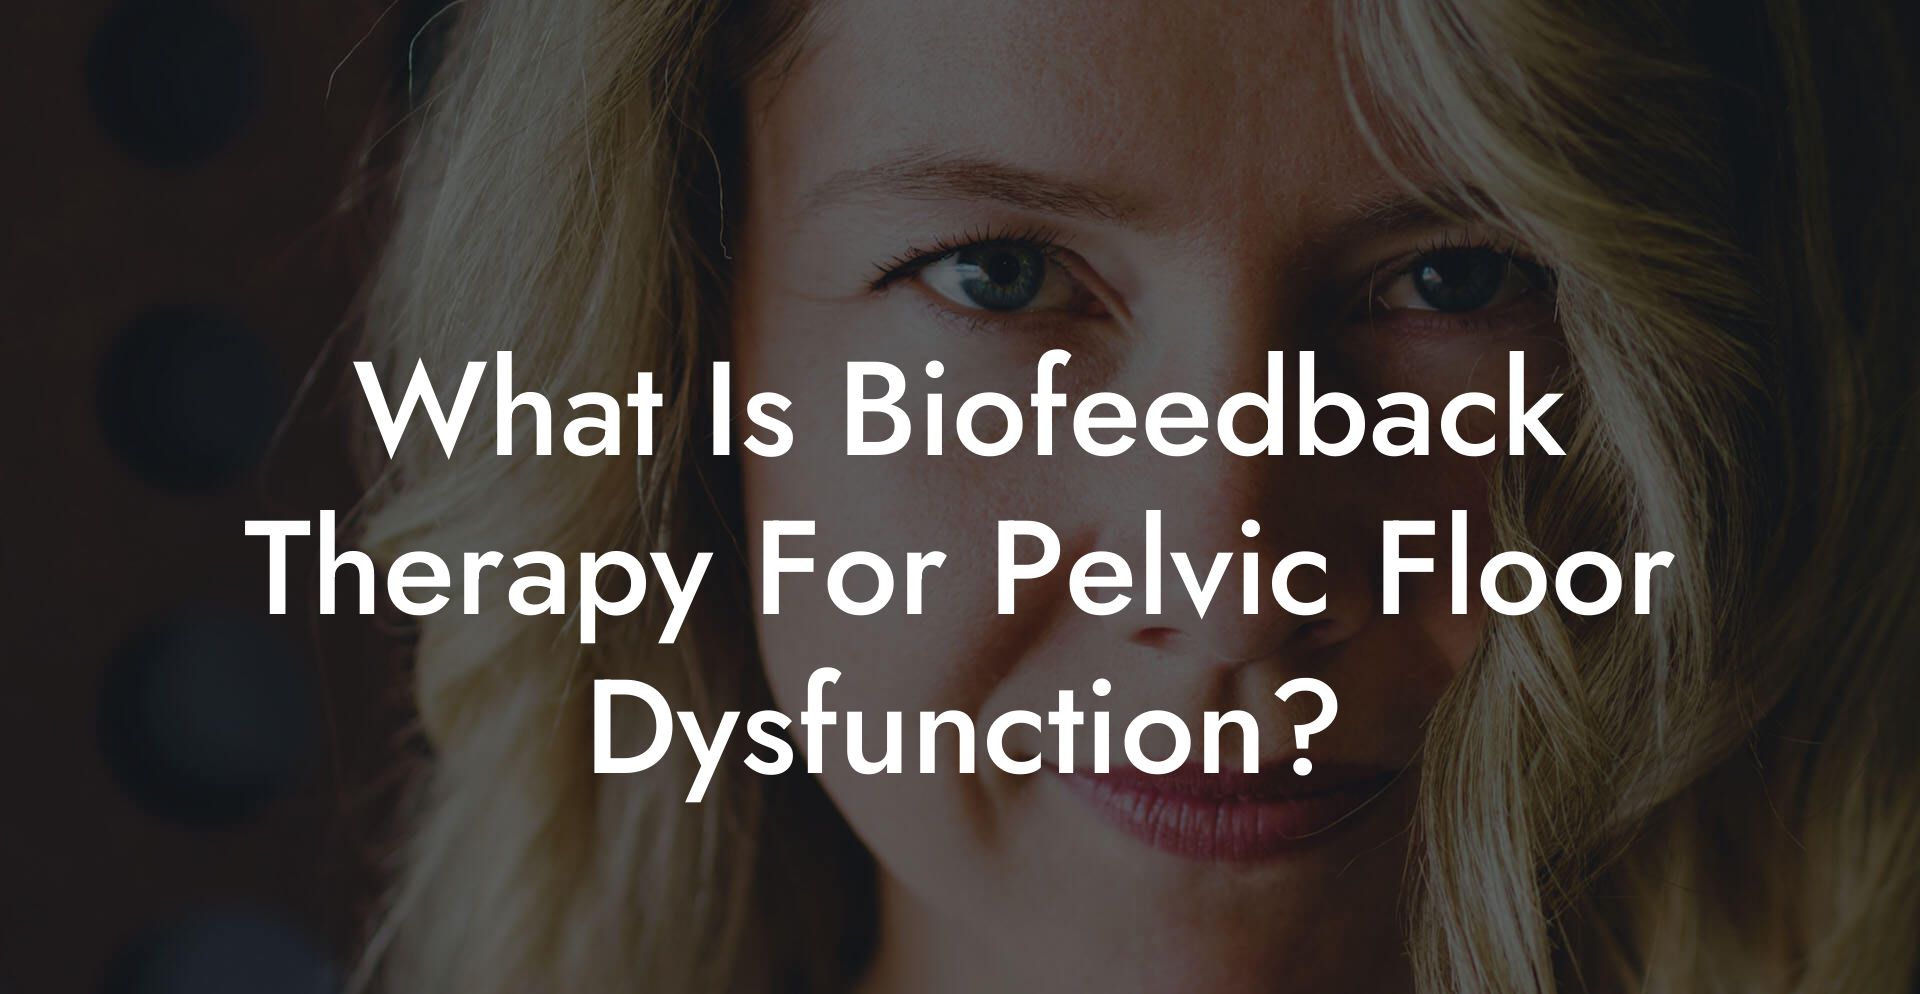 What Is Biofeedback Therapy For Pelvic Floor Dysfunction?